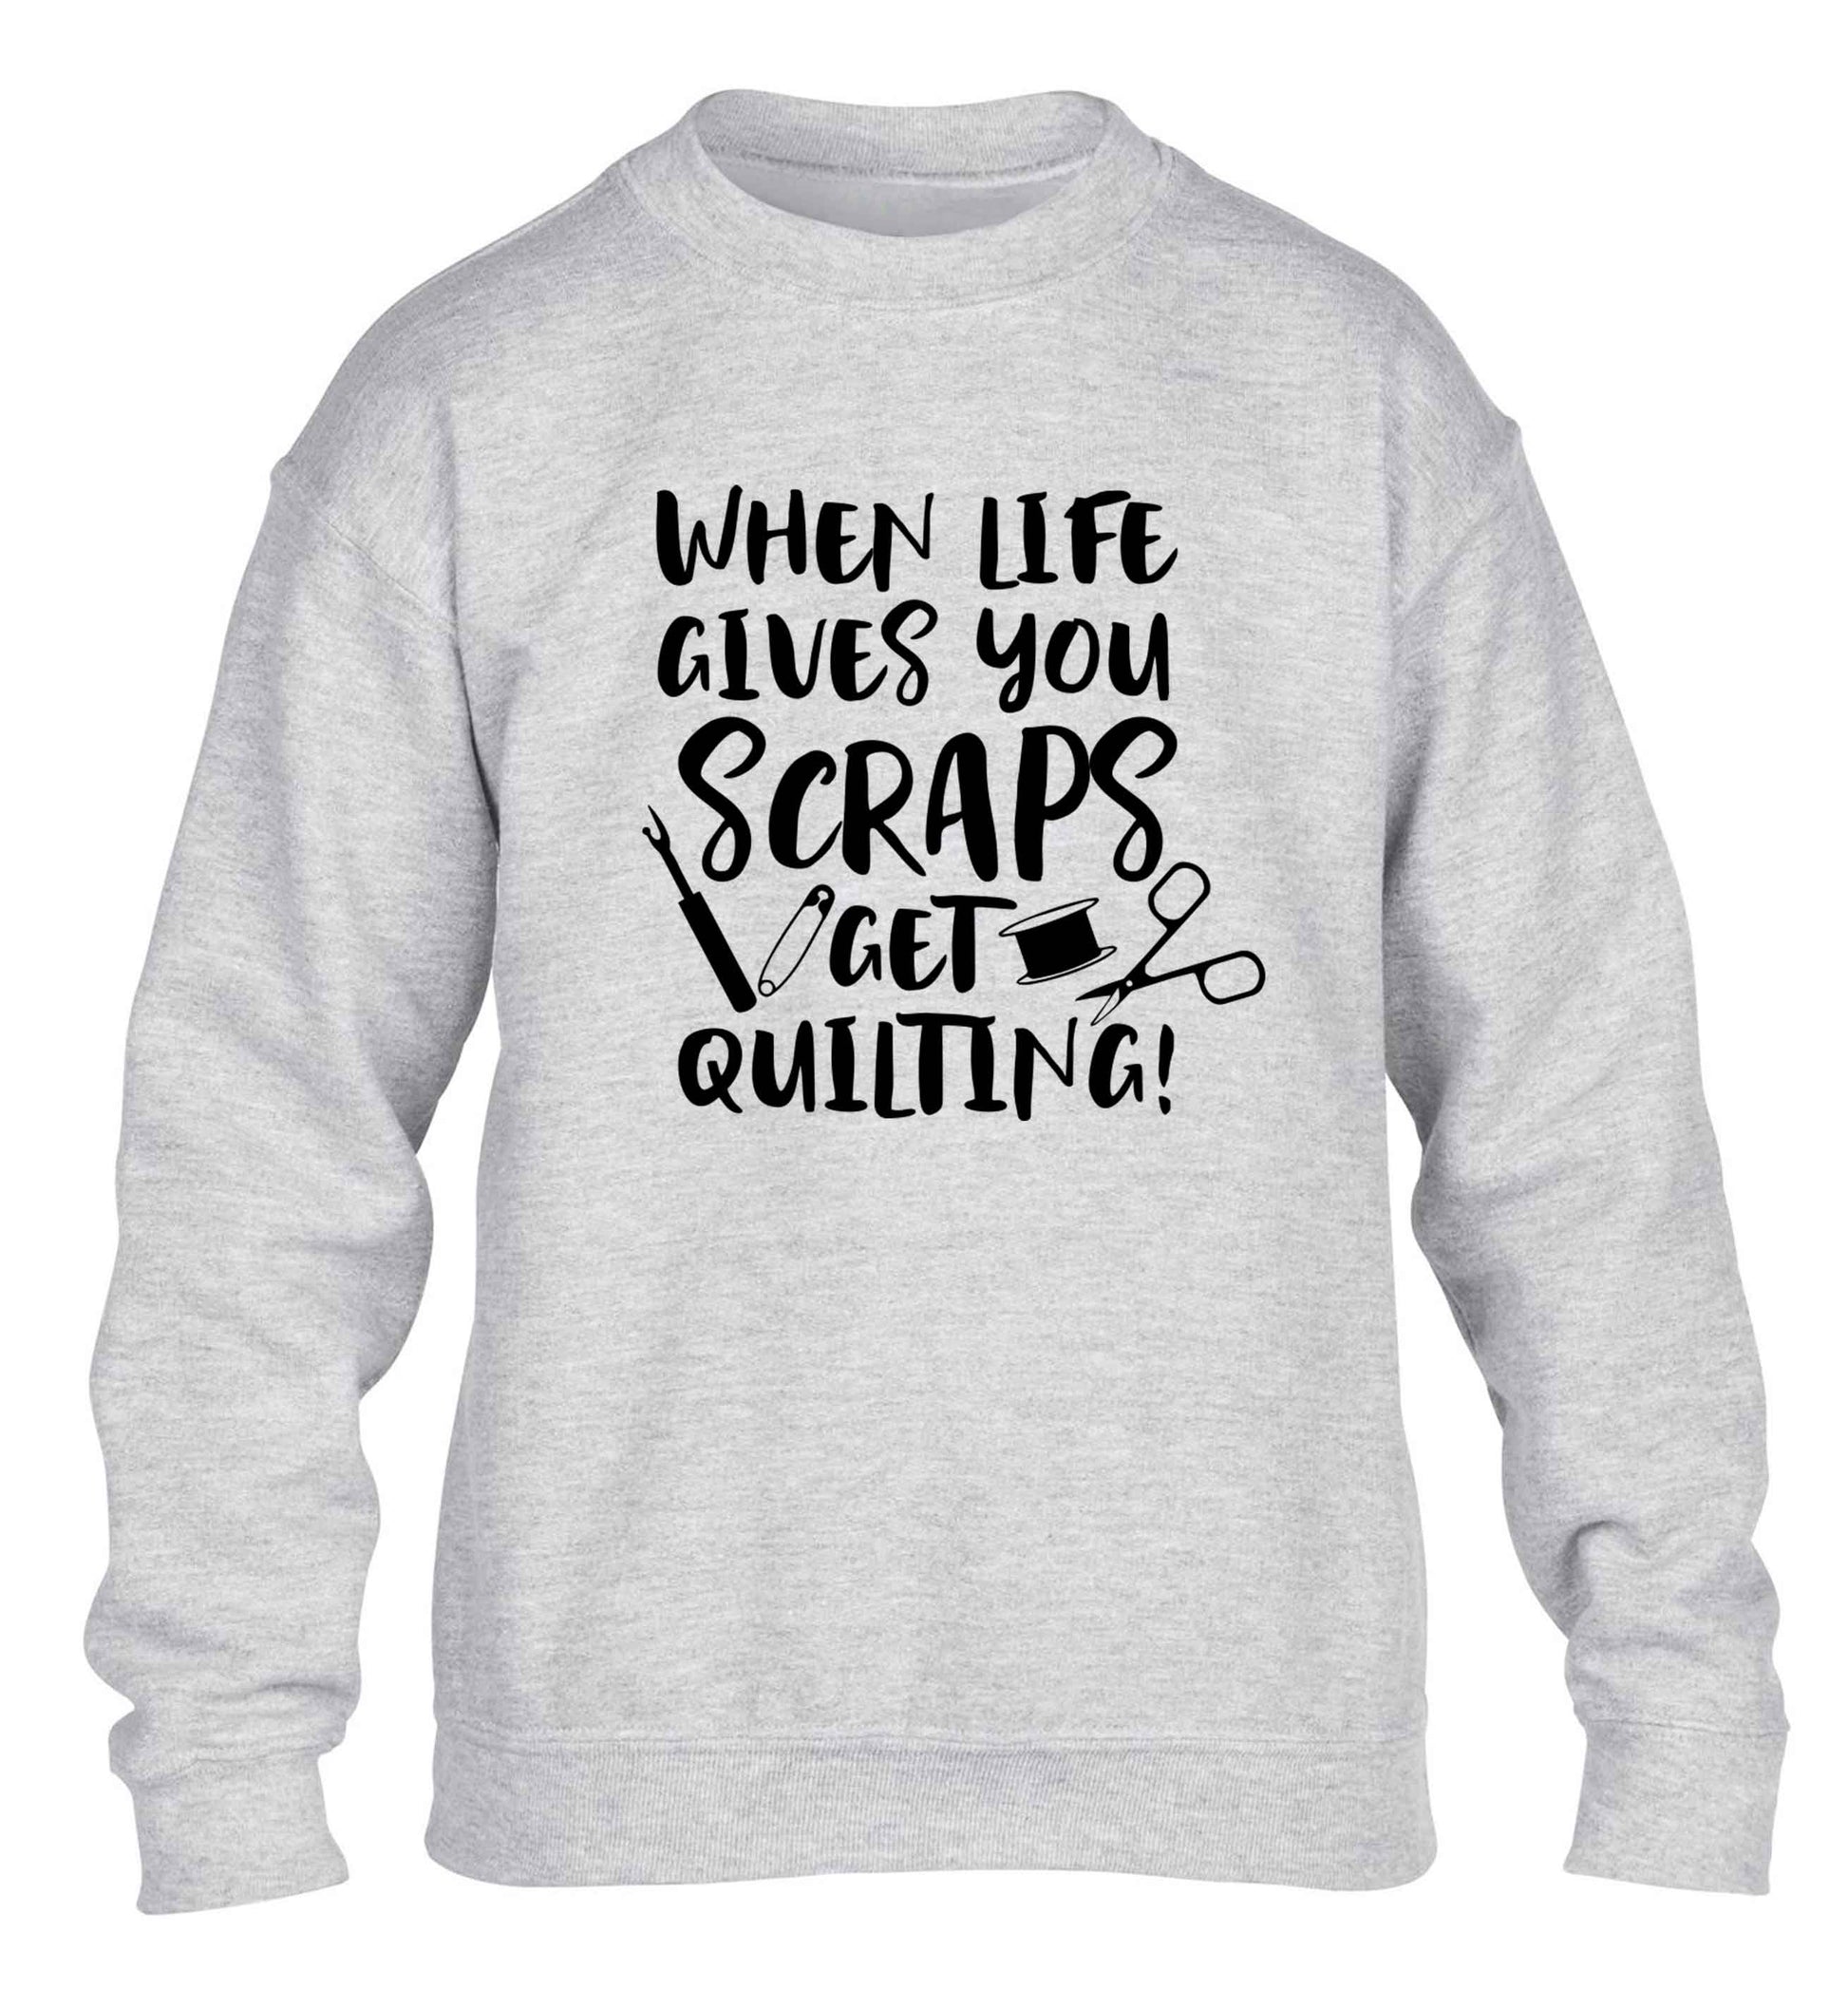 When life gives you scraps get quilting! children's grey sweater 12-13 Years